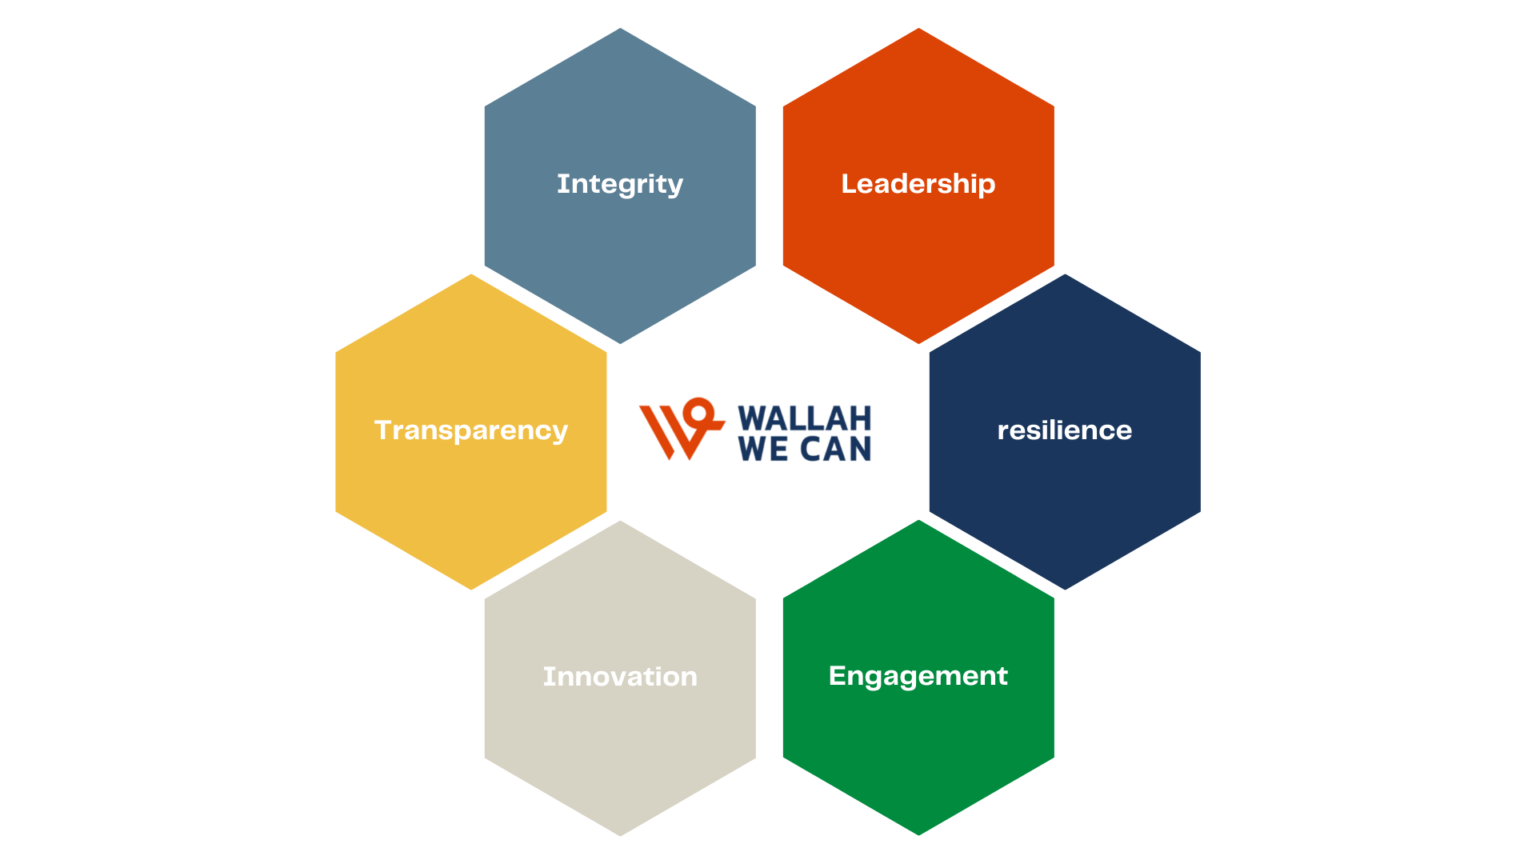 a hexagone containing wallah we can values: integrity, tranparency, innovation, engagement, resilience,leadership